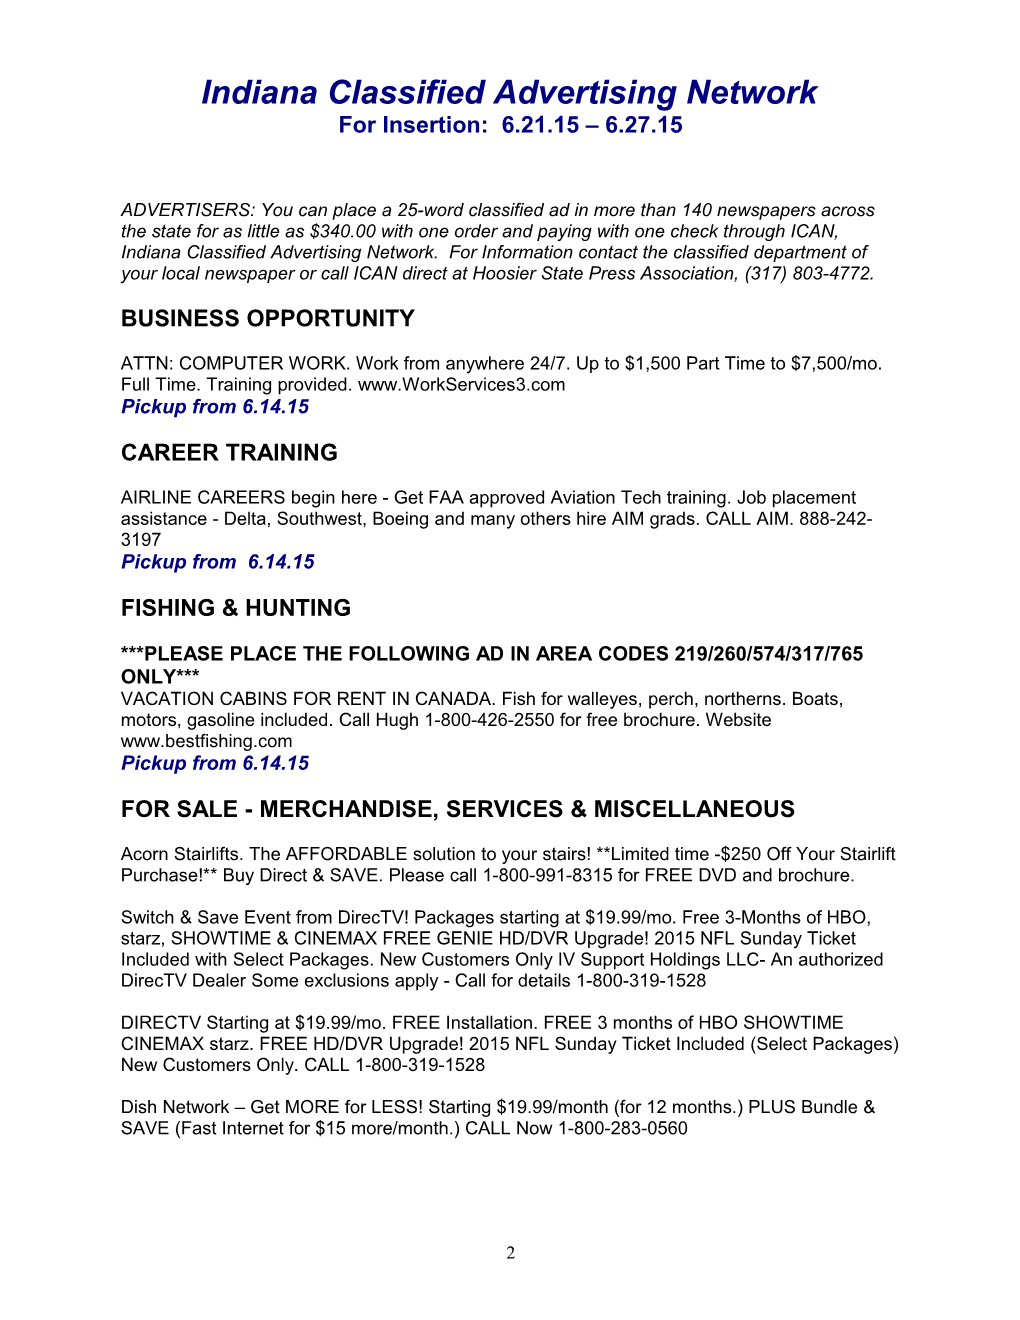 Indiana Classified Advertising Network s2